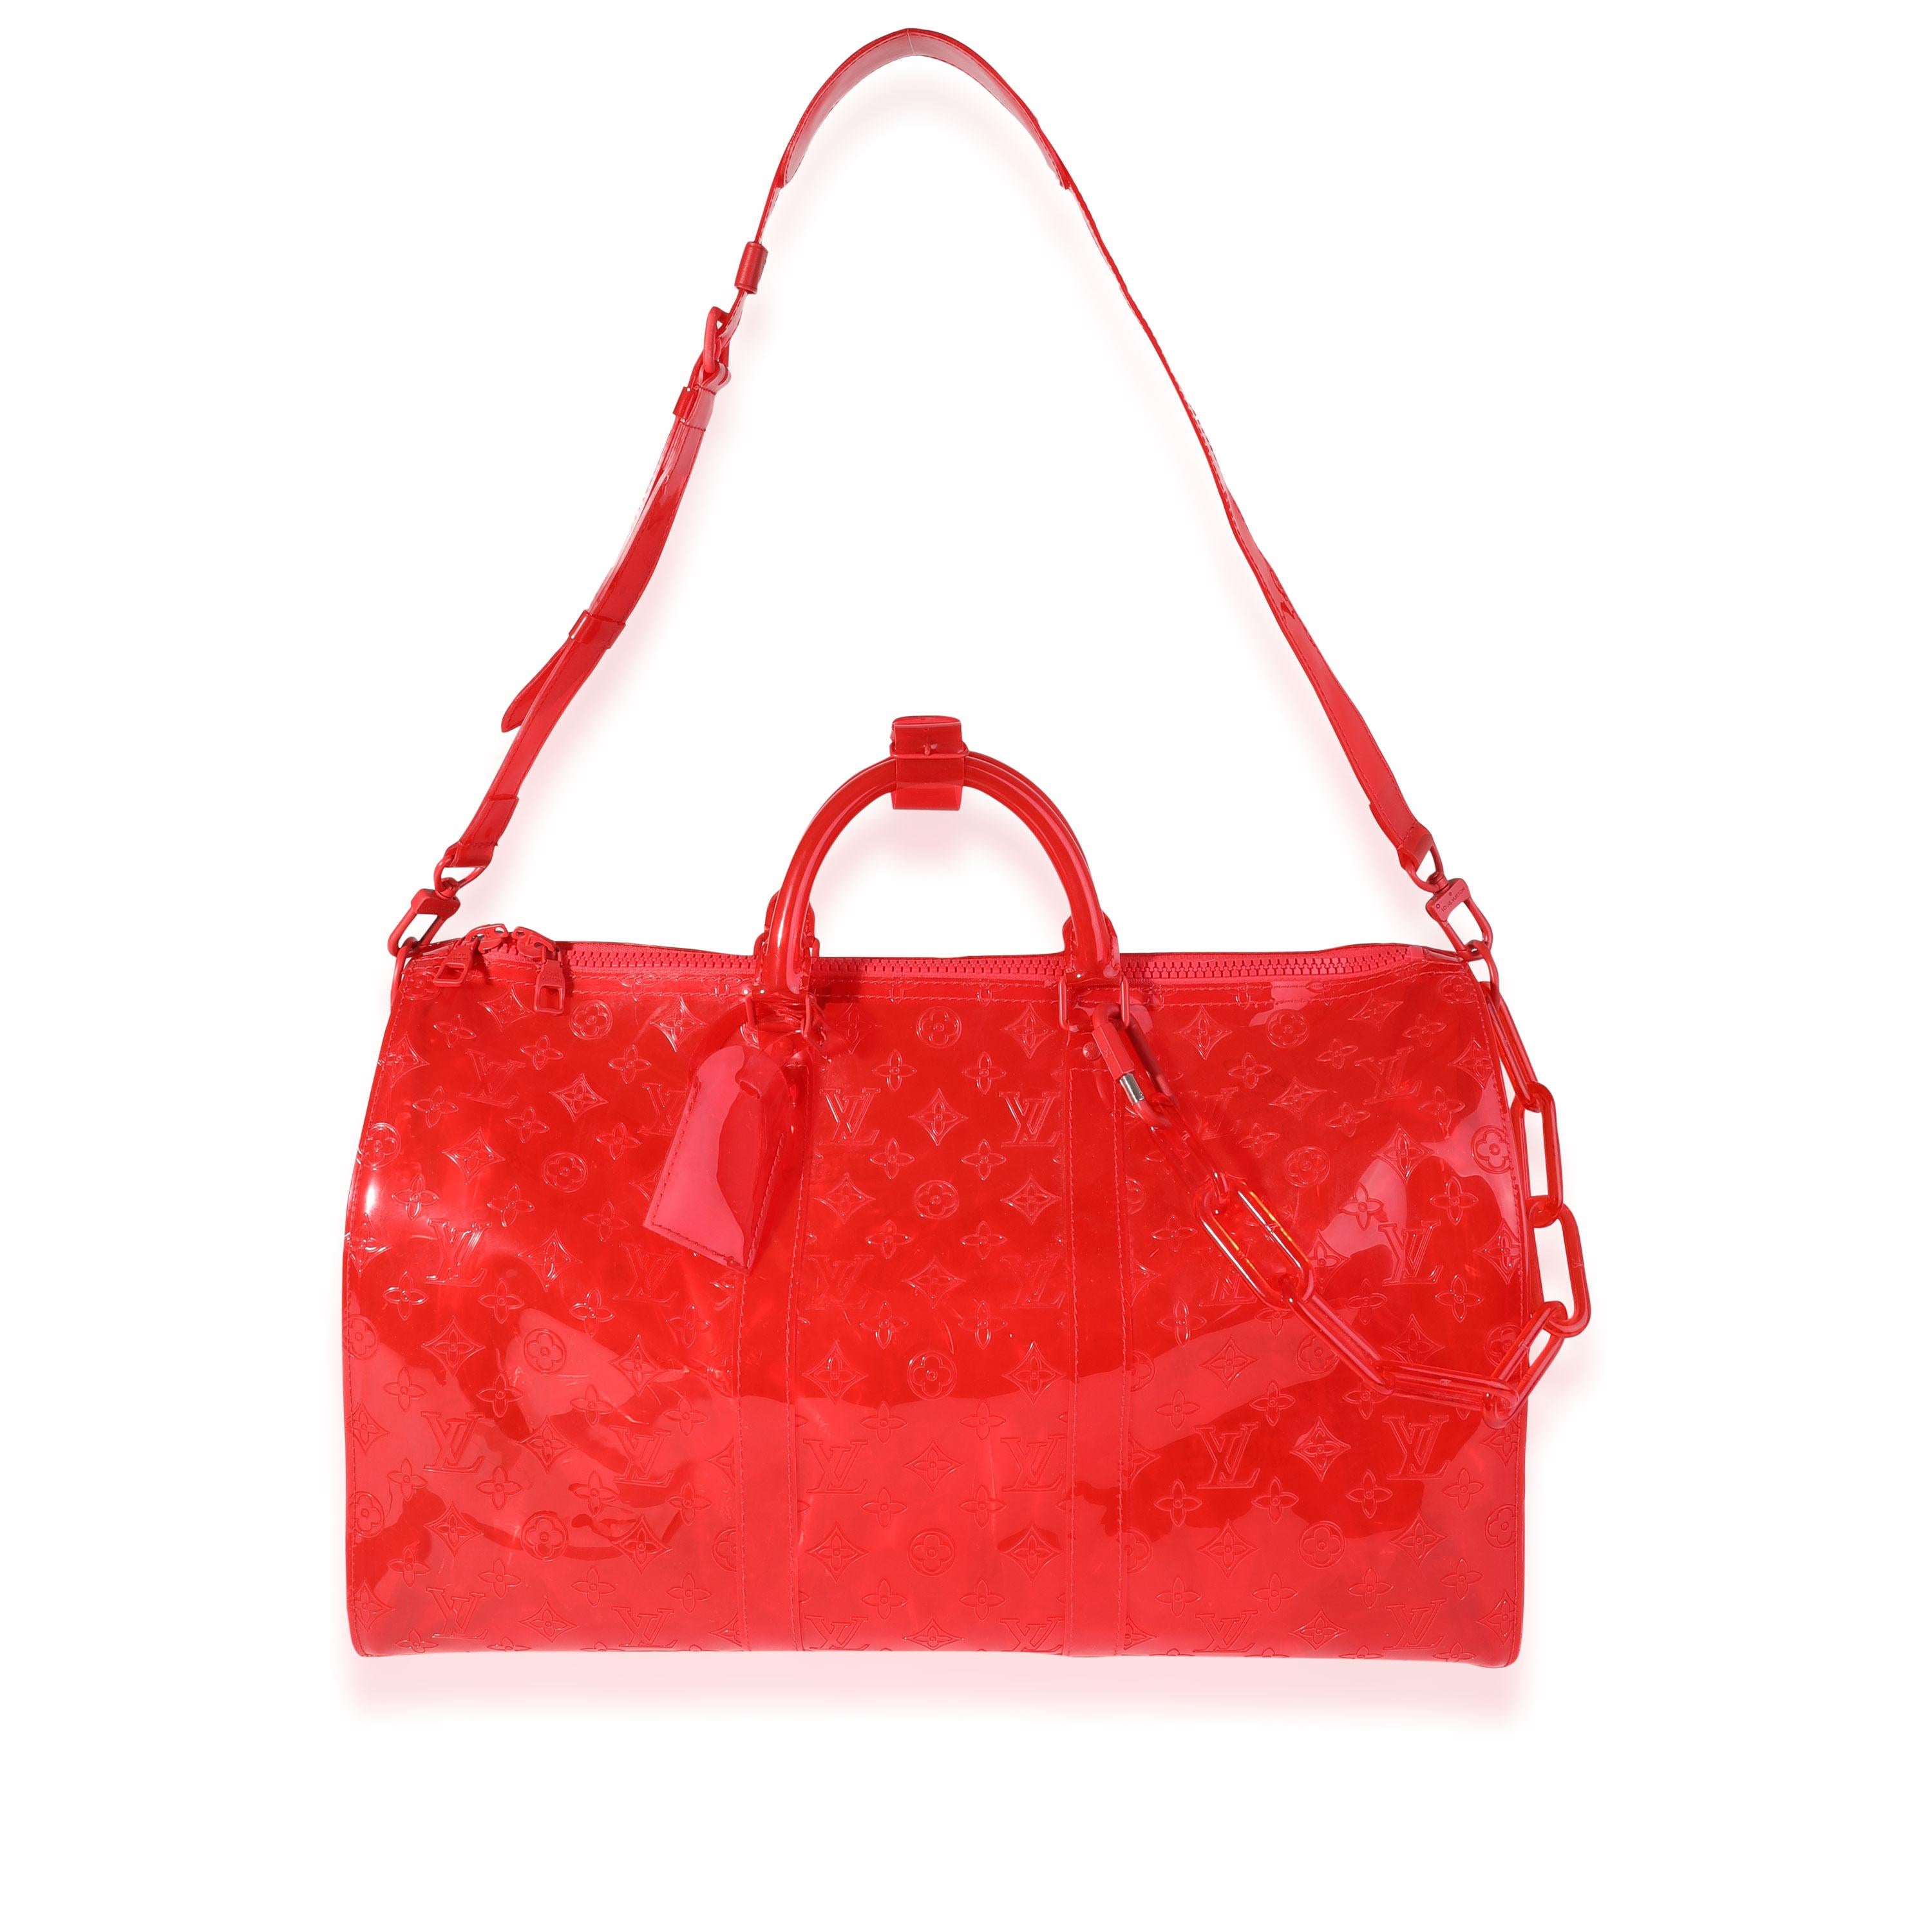 Listing Title: Louis Vuitton x Virgil Abloh Red Monogram PVC  Keepall Bandouliére 50
SKU: 120439
Condition: Pre-owned (3000)
Handbag Condition: Very Good
Condition Comments: Very Good Condition. Creasing, scuffing, and light discoloration to PVC.